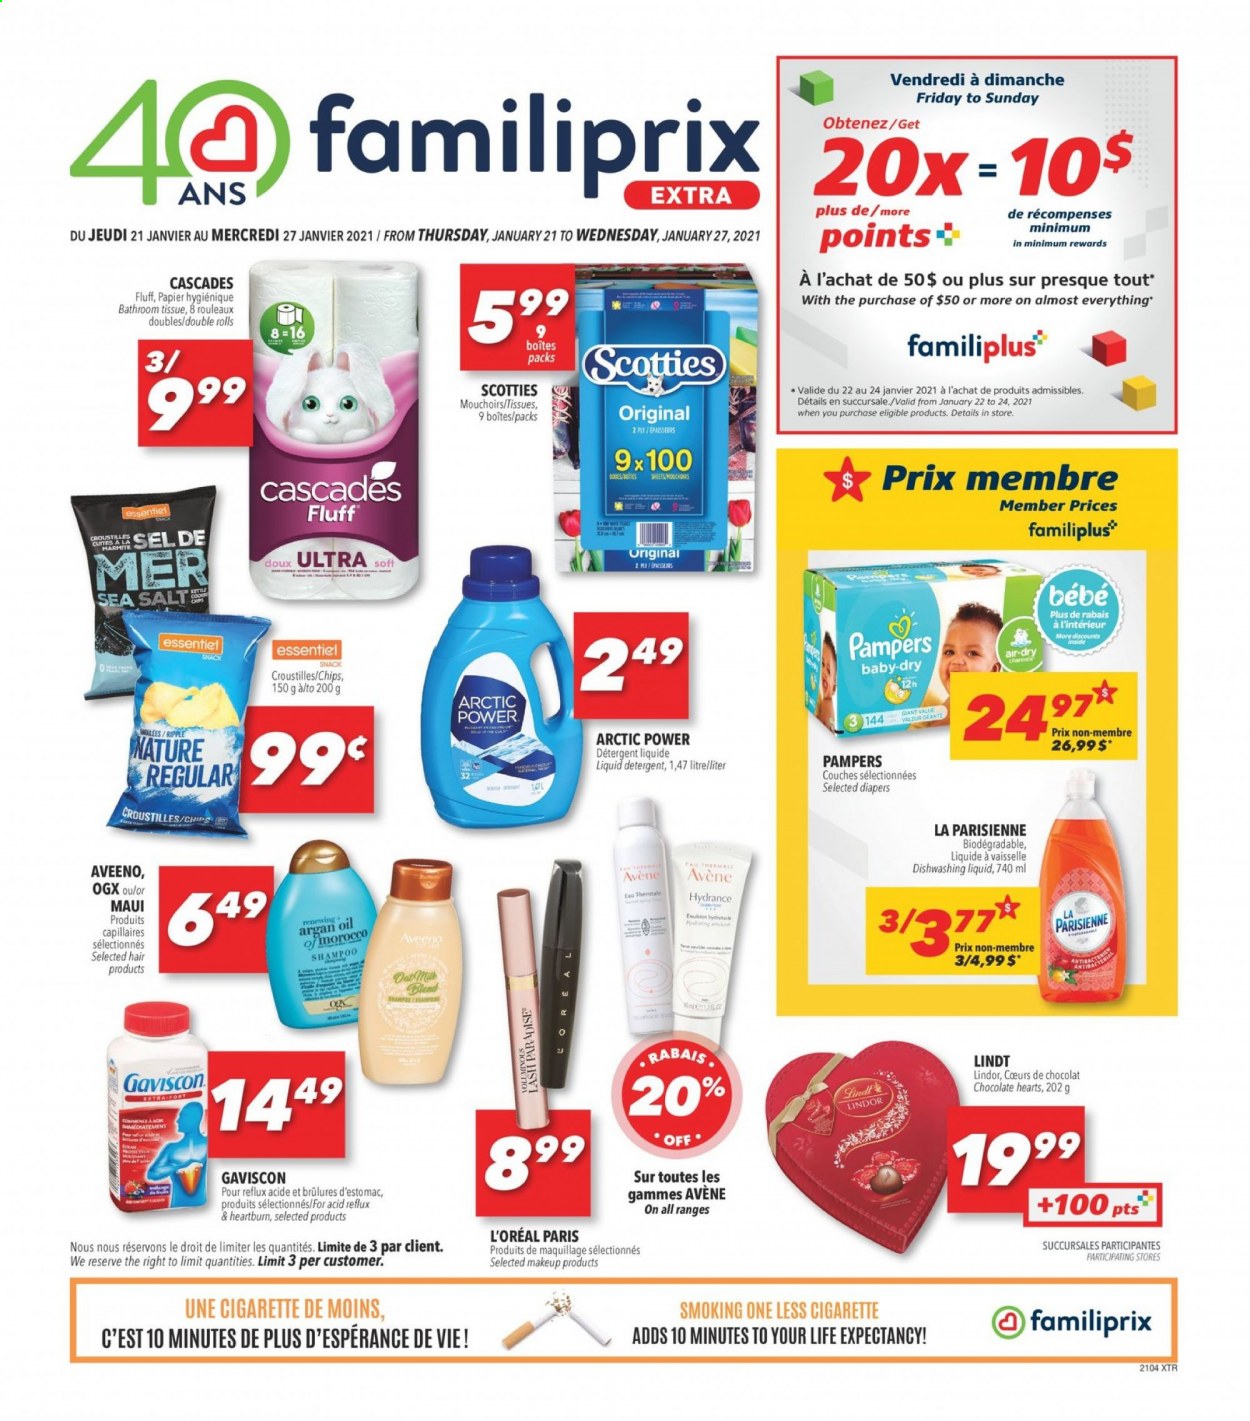 thumbnail - Familiprix Extra Flyer - January 21, 2021 - January 27, 2021 - Sales products - chocolate, snack, oats, nappies, Aveeno, bath tissue, liquid detergent, dishwashing liquid, L’Oréal, OGX, makeup, argan oil, Gaviscon, shampoo, Pampers, chips. Page 1.